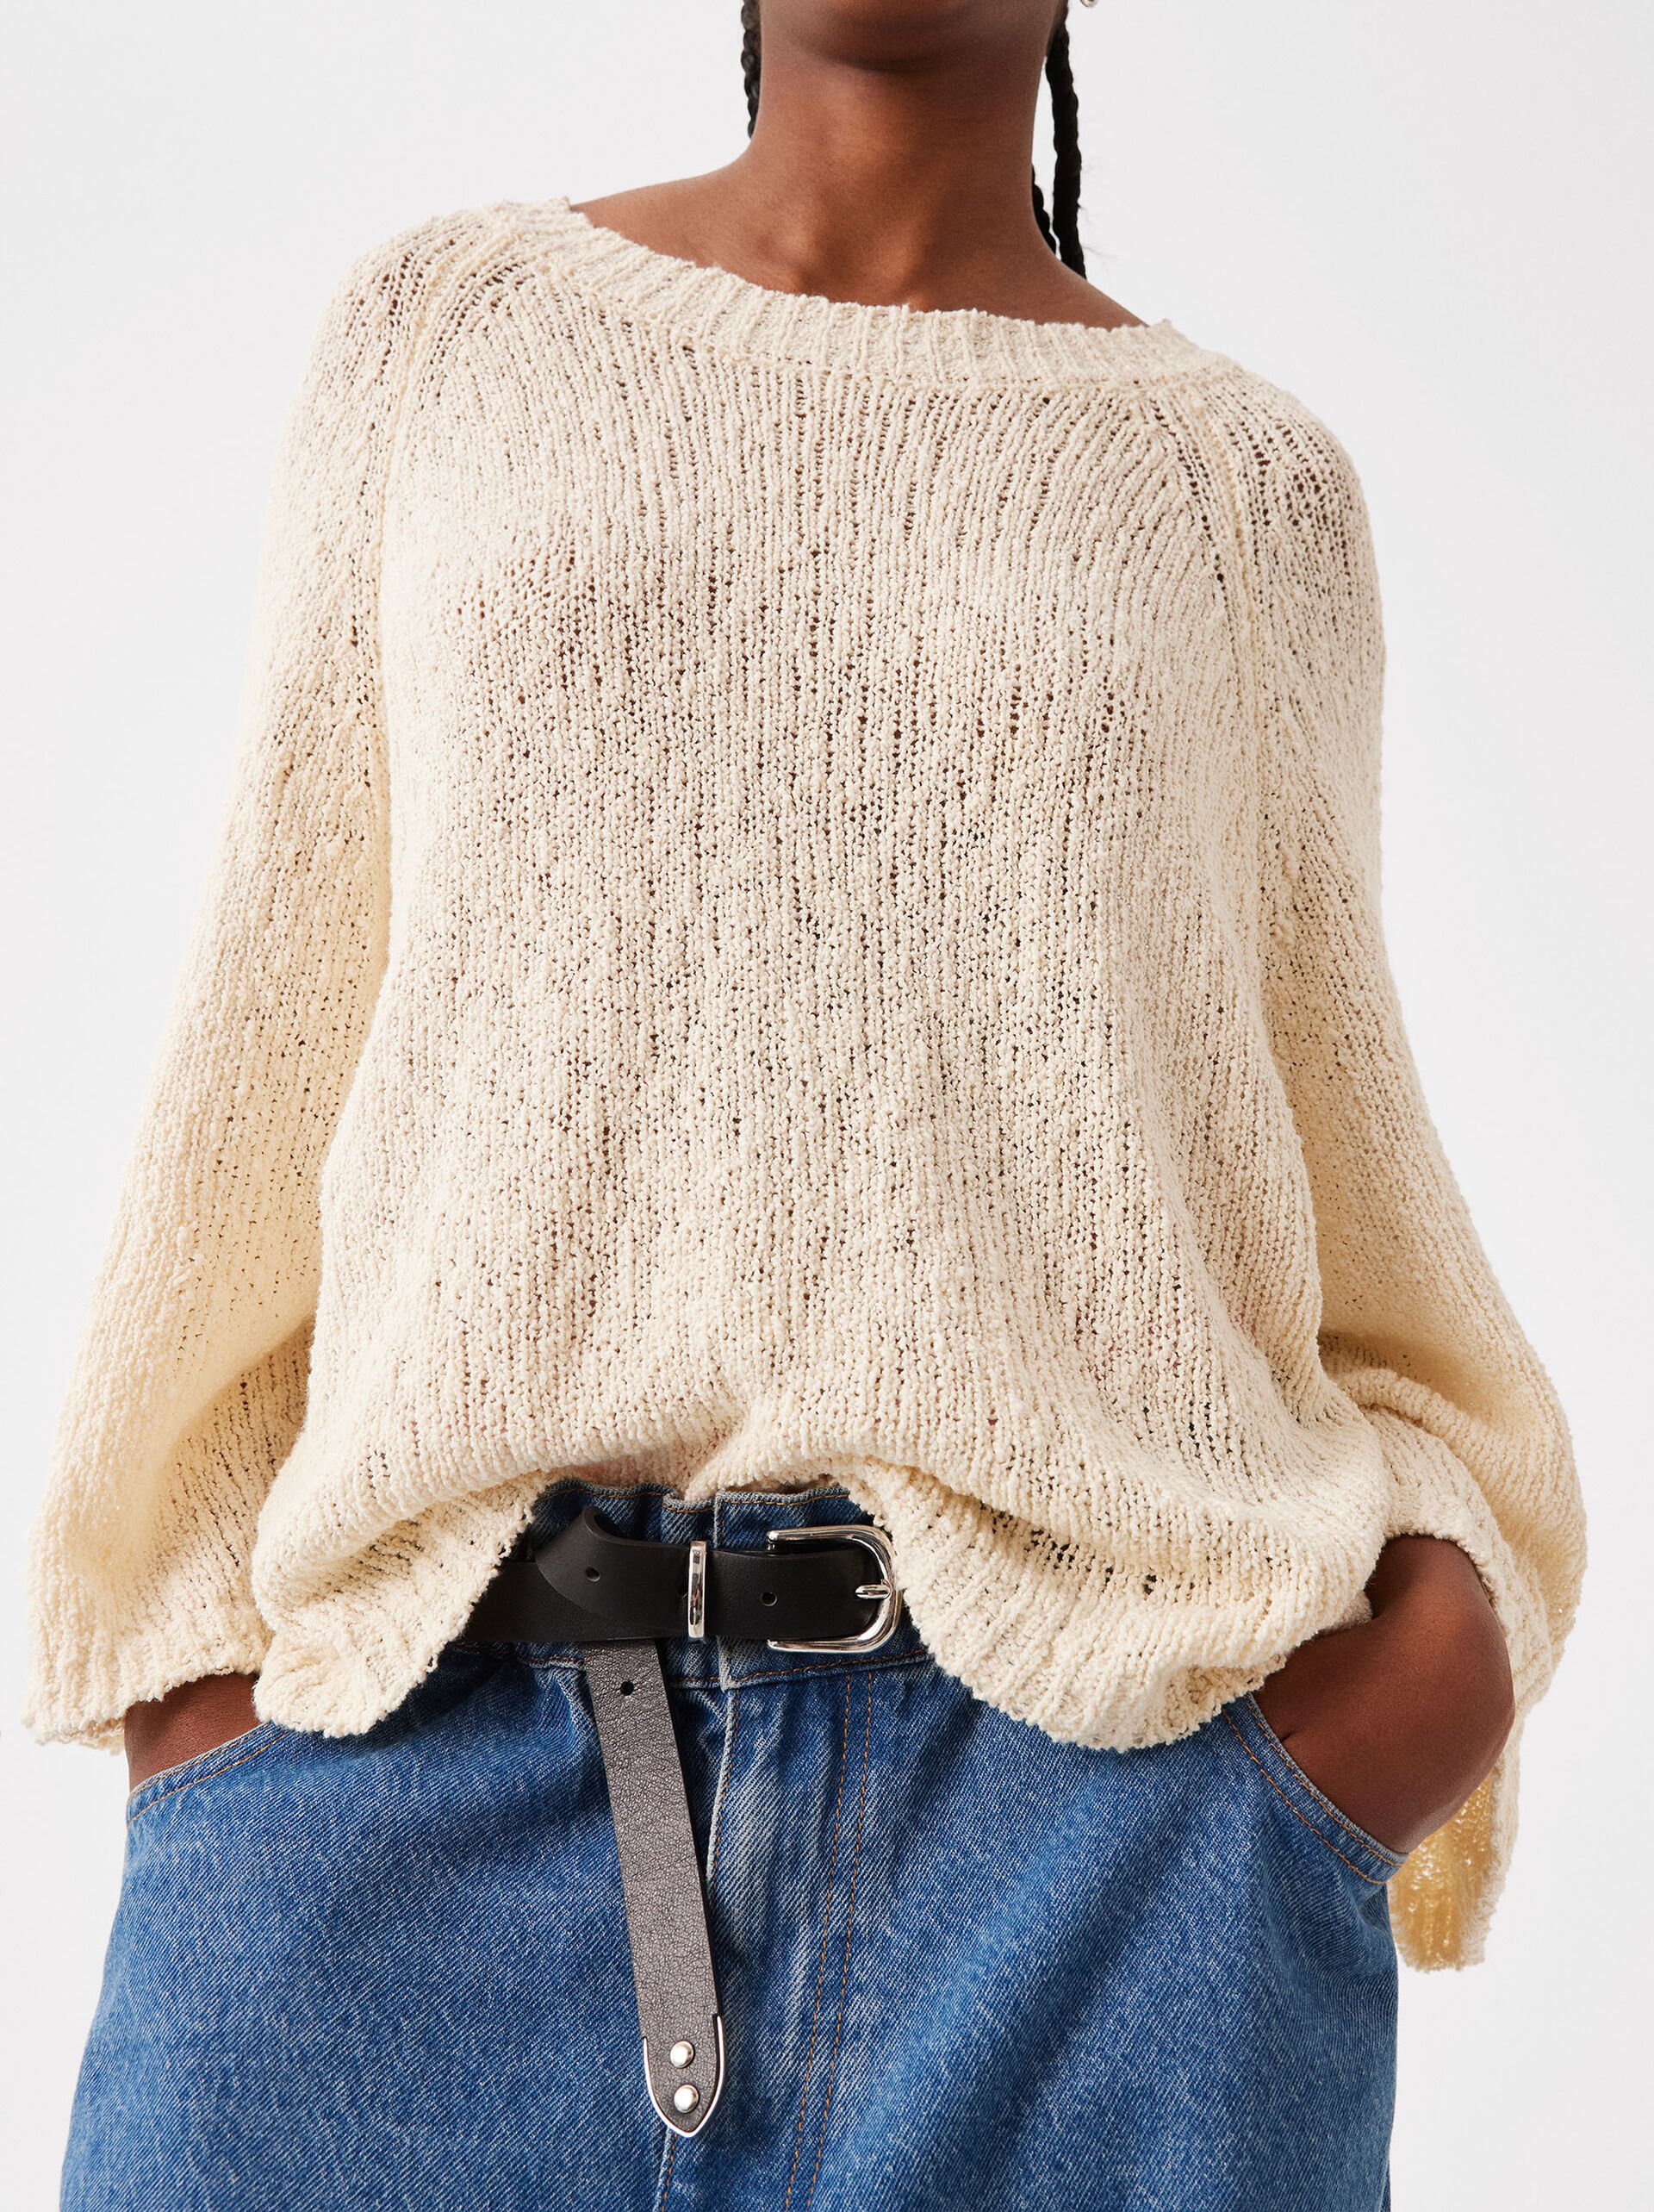 Knit Sweater image number 6.0